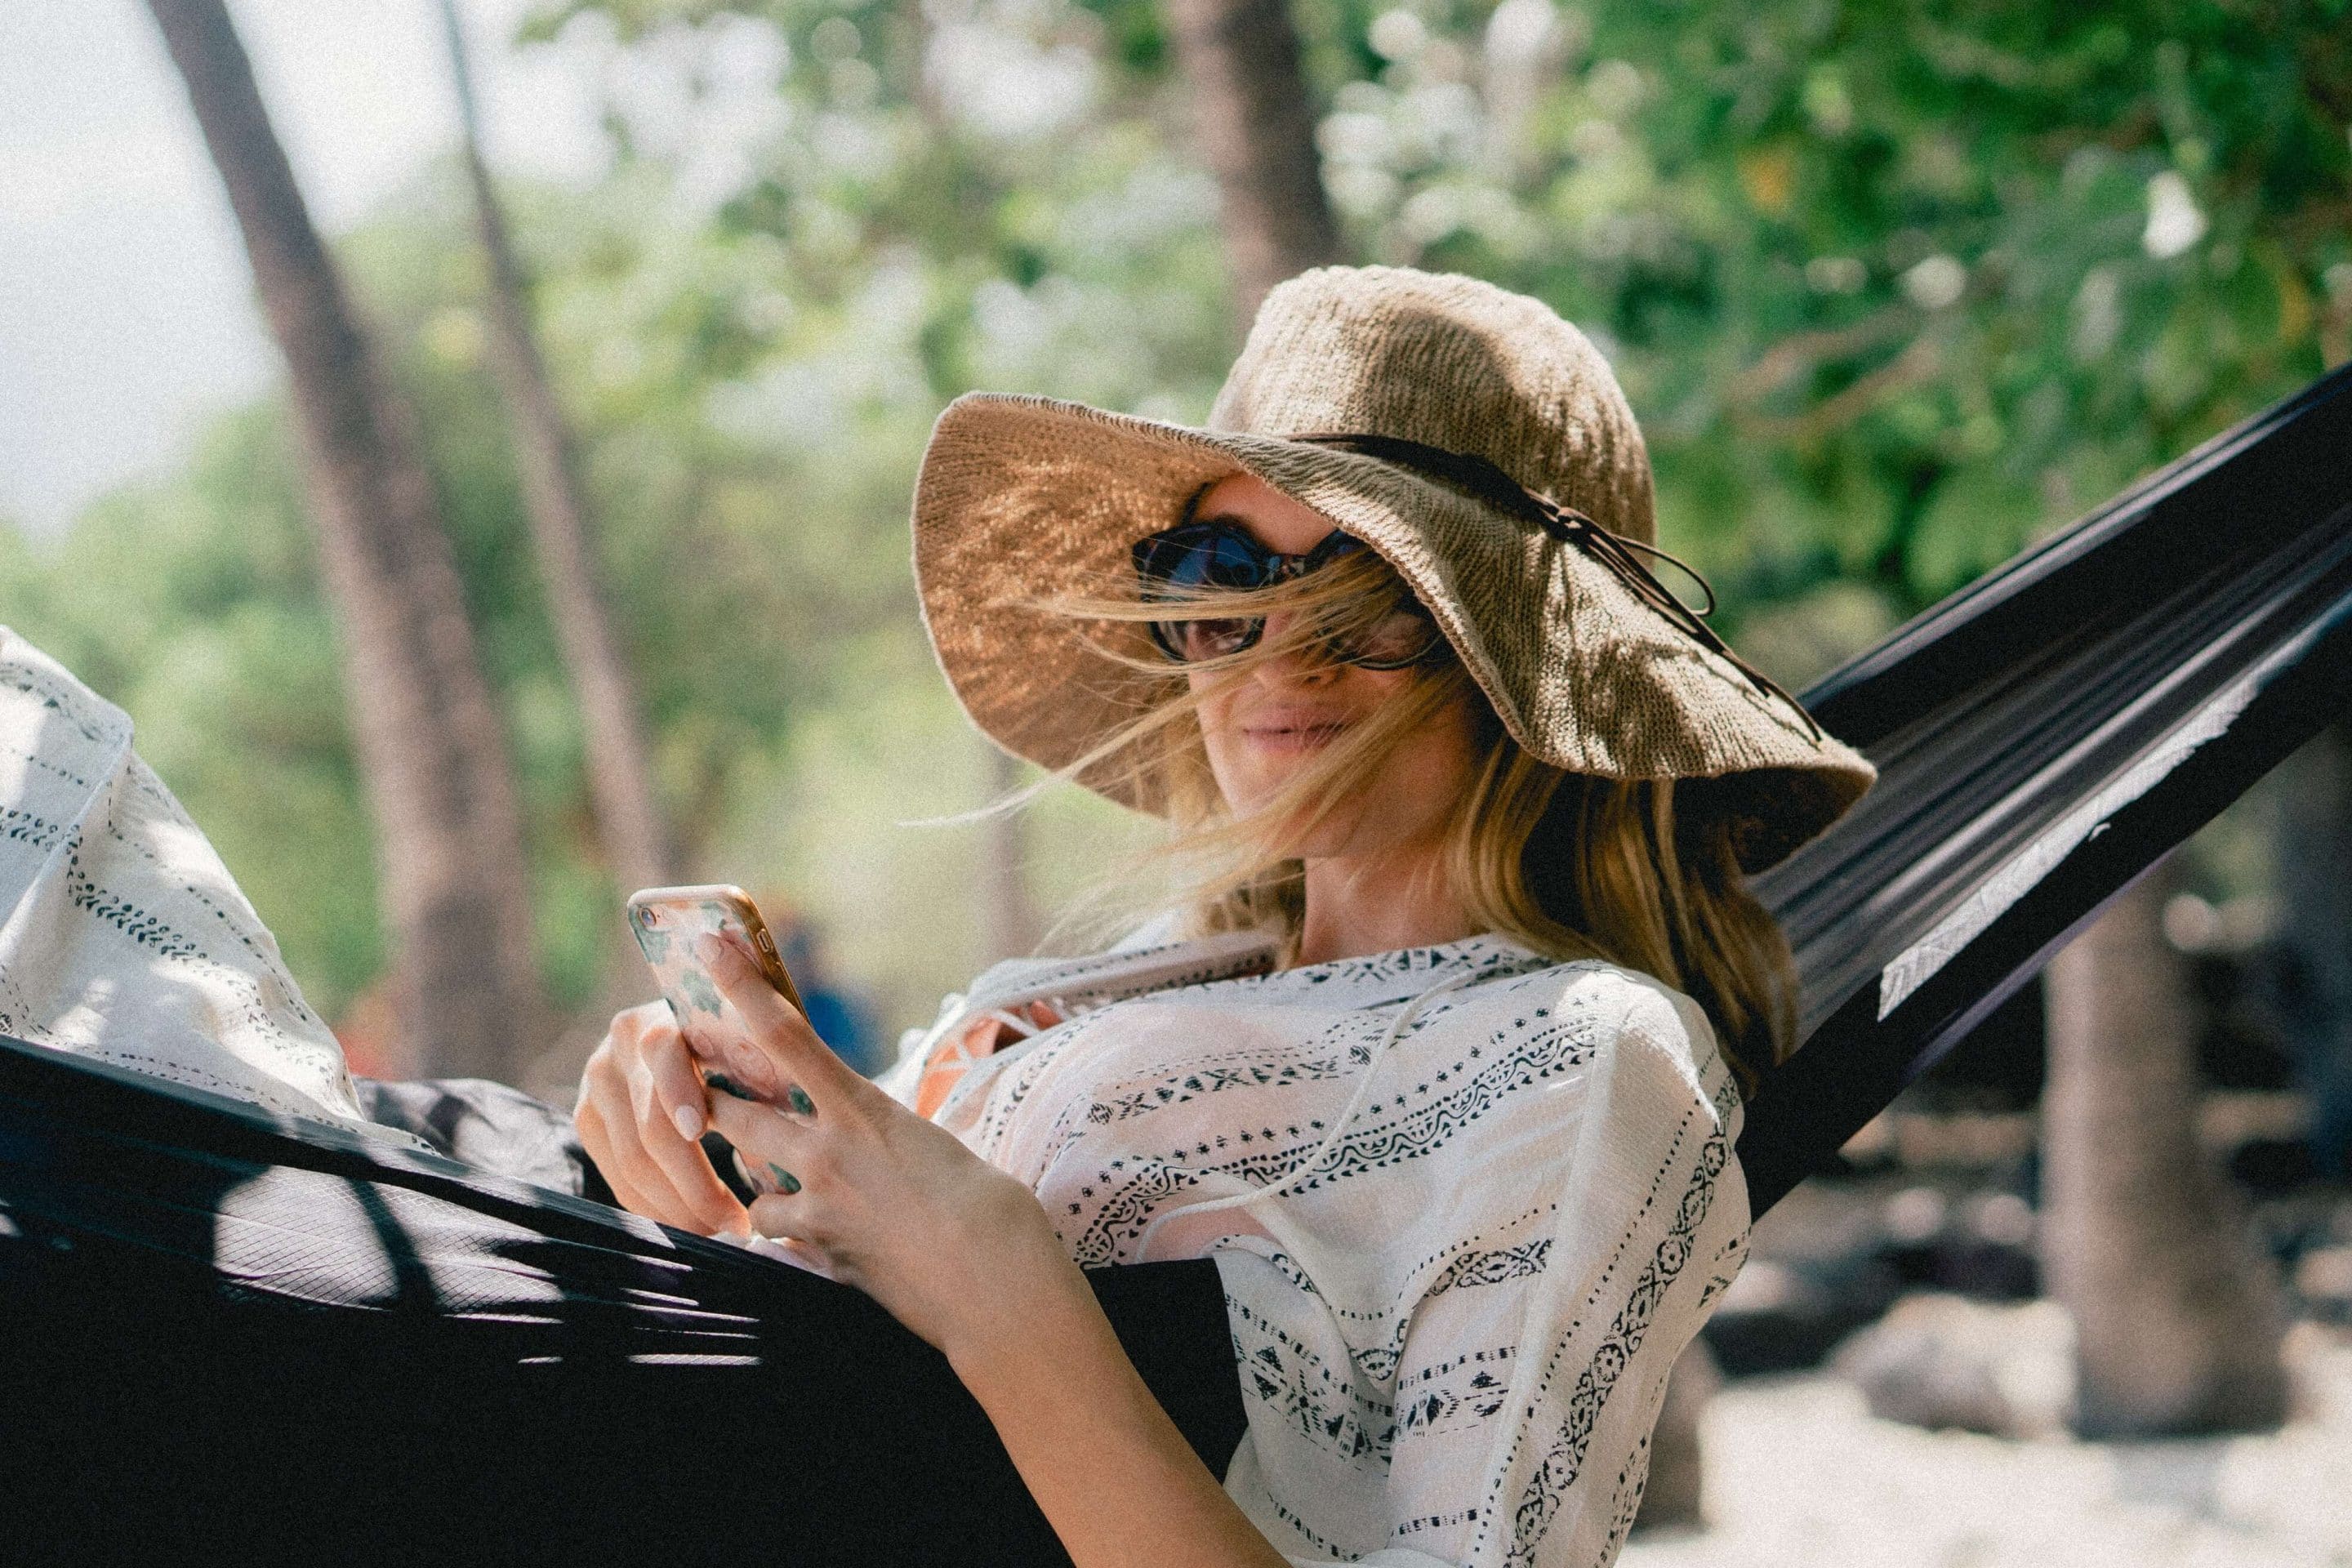 3 Quick Ways to Destress When the Week is Too Much